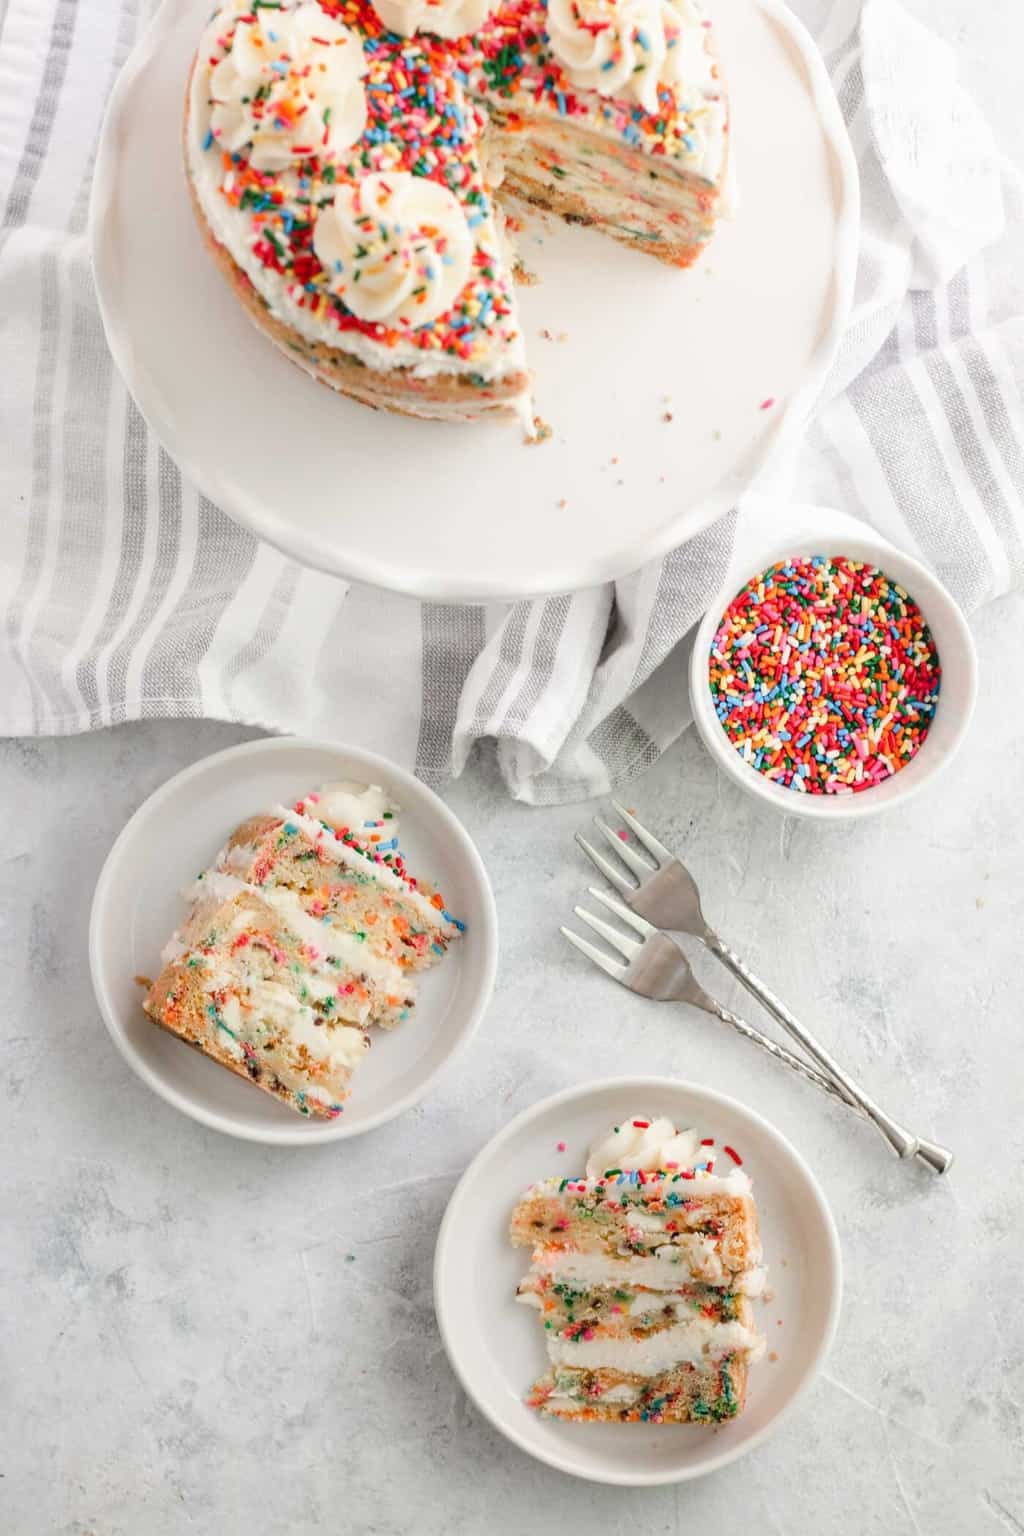 photo of cake slices on plates with sprinkles